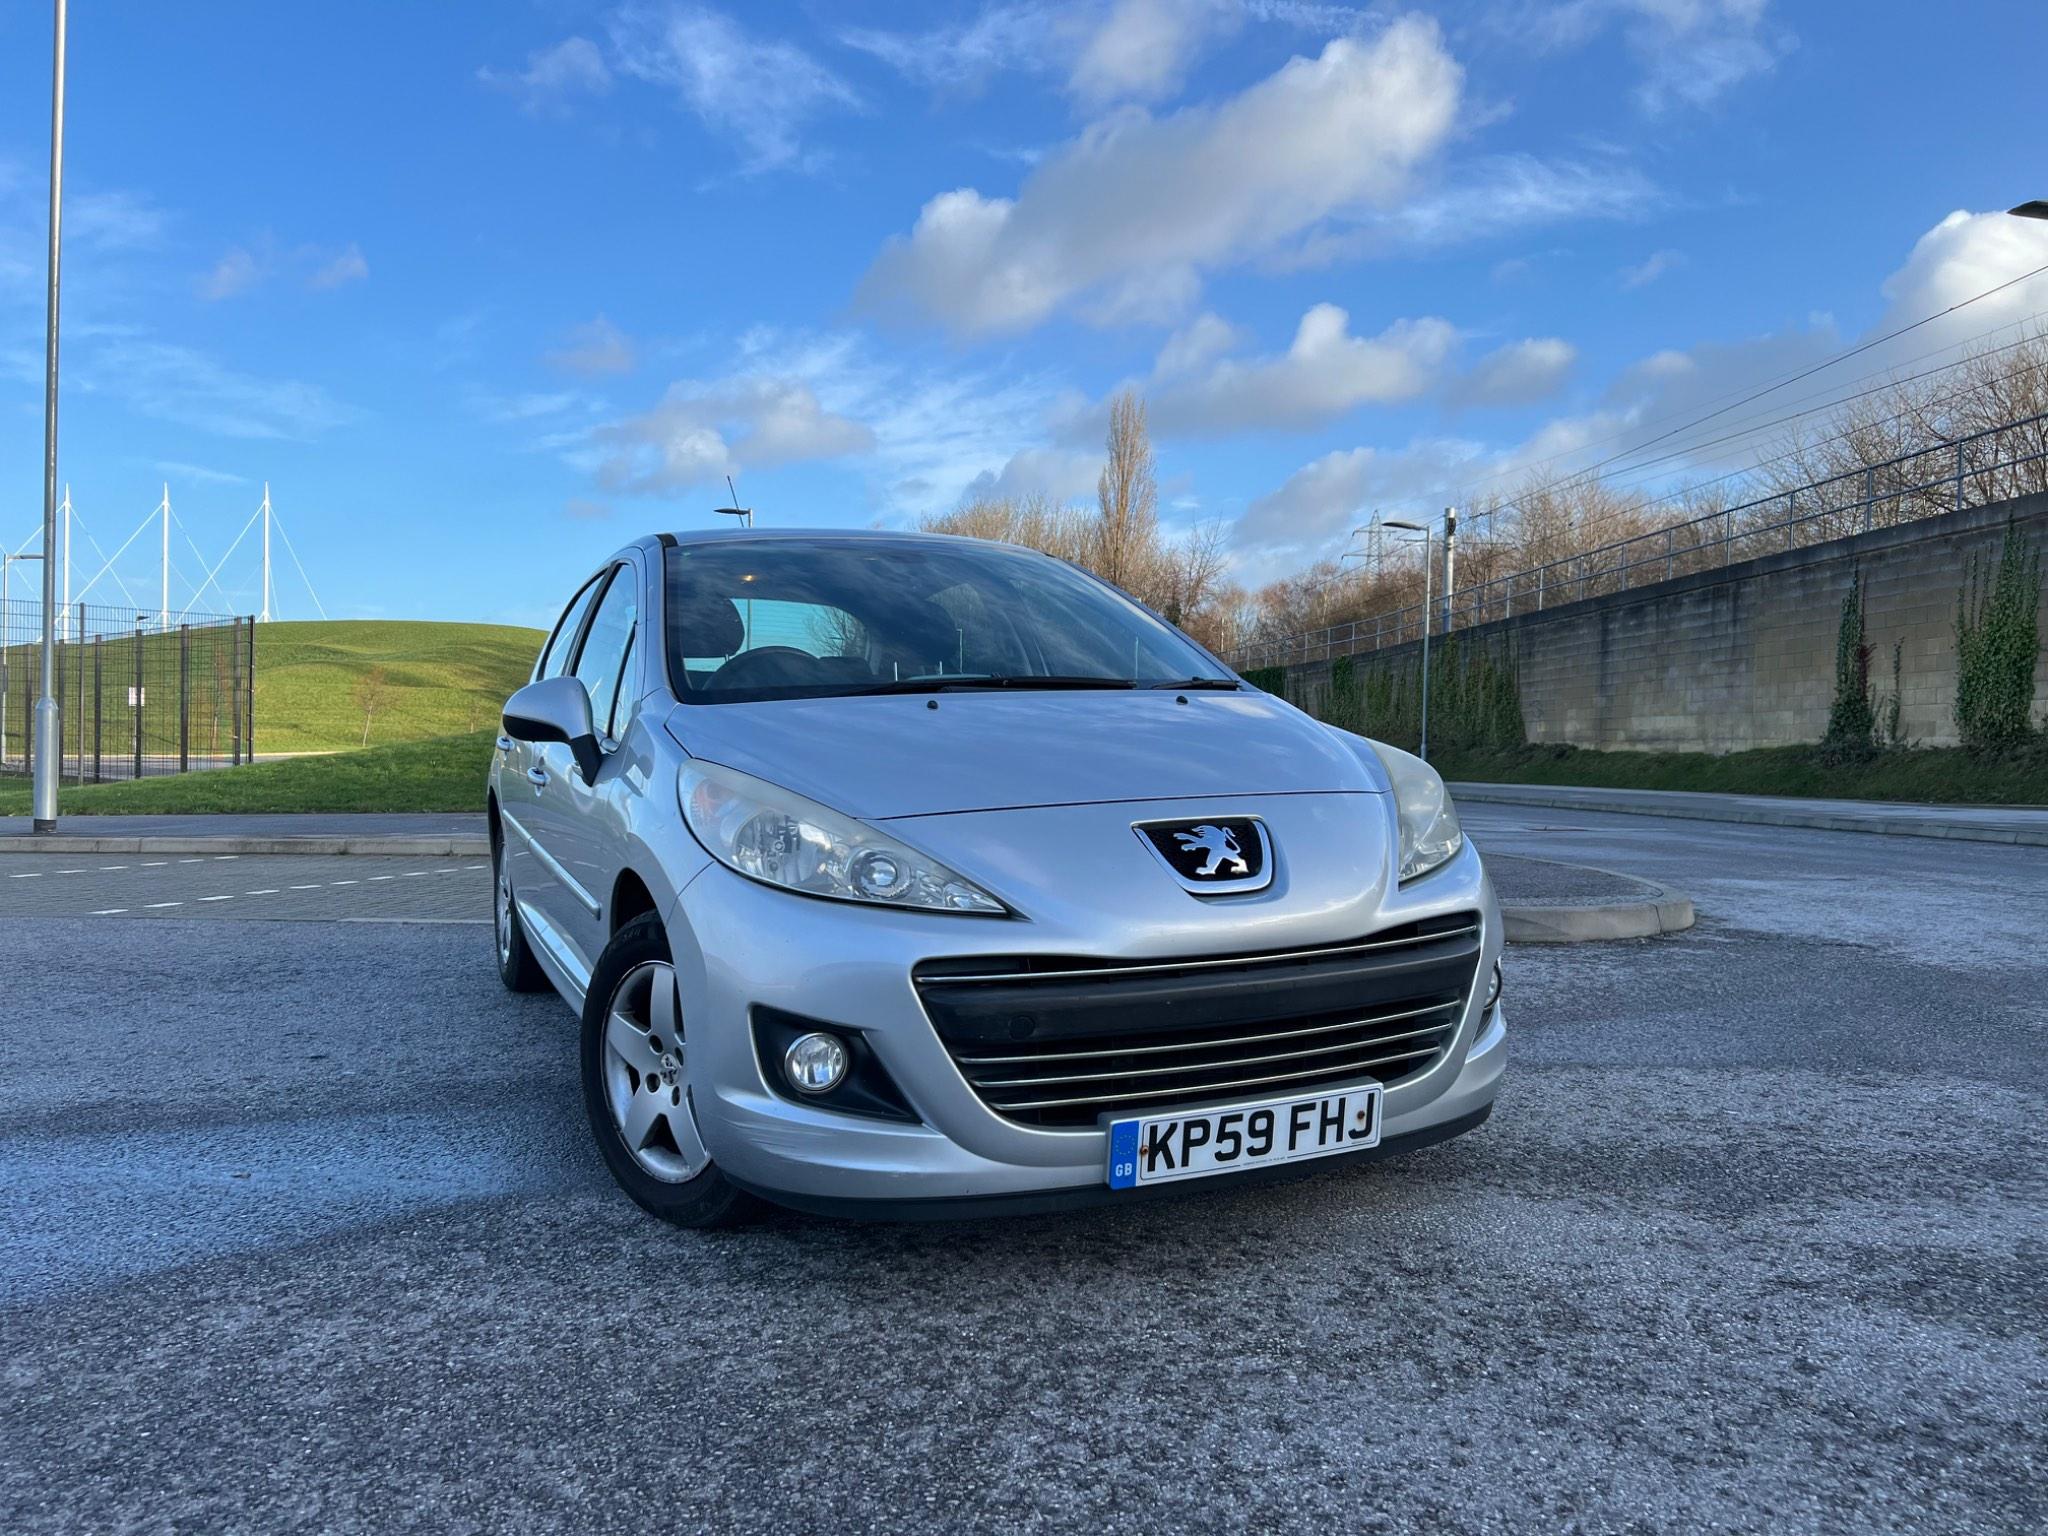 Used Peugeot 207 Review - 2006-2012